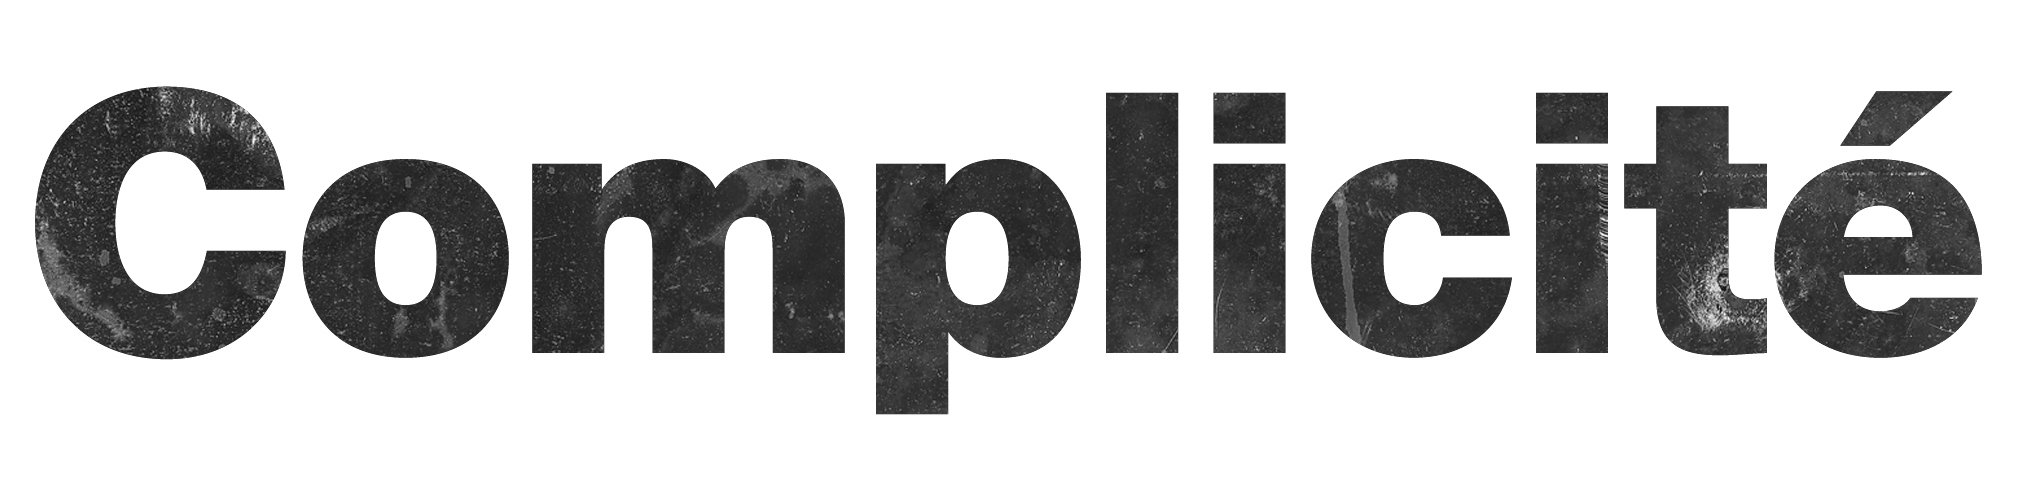 Complicite logo with accent